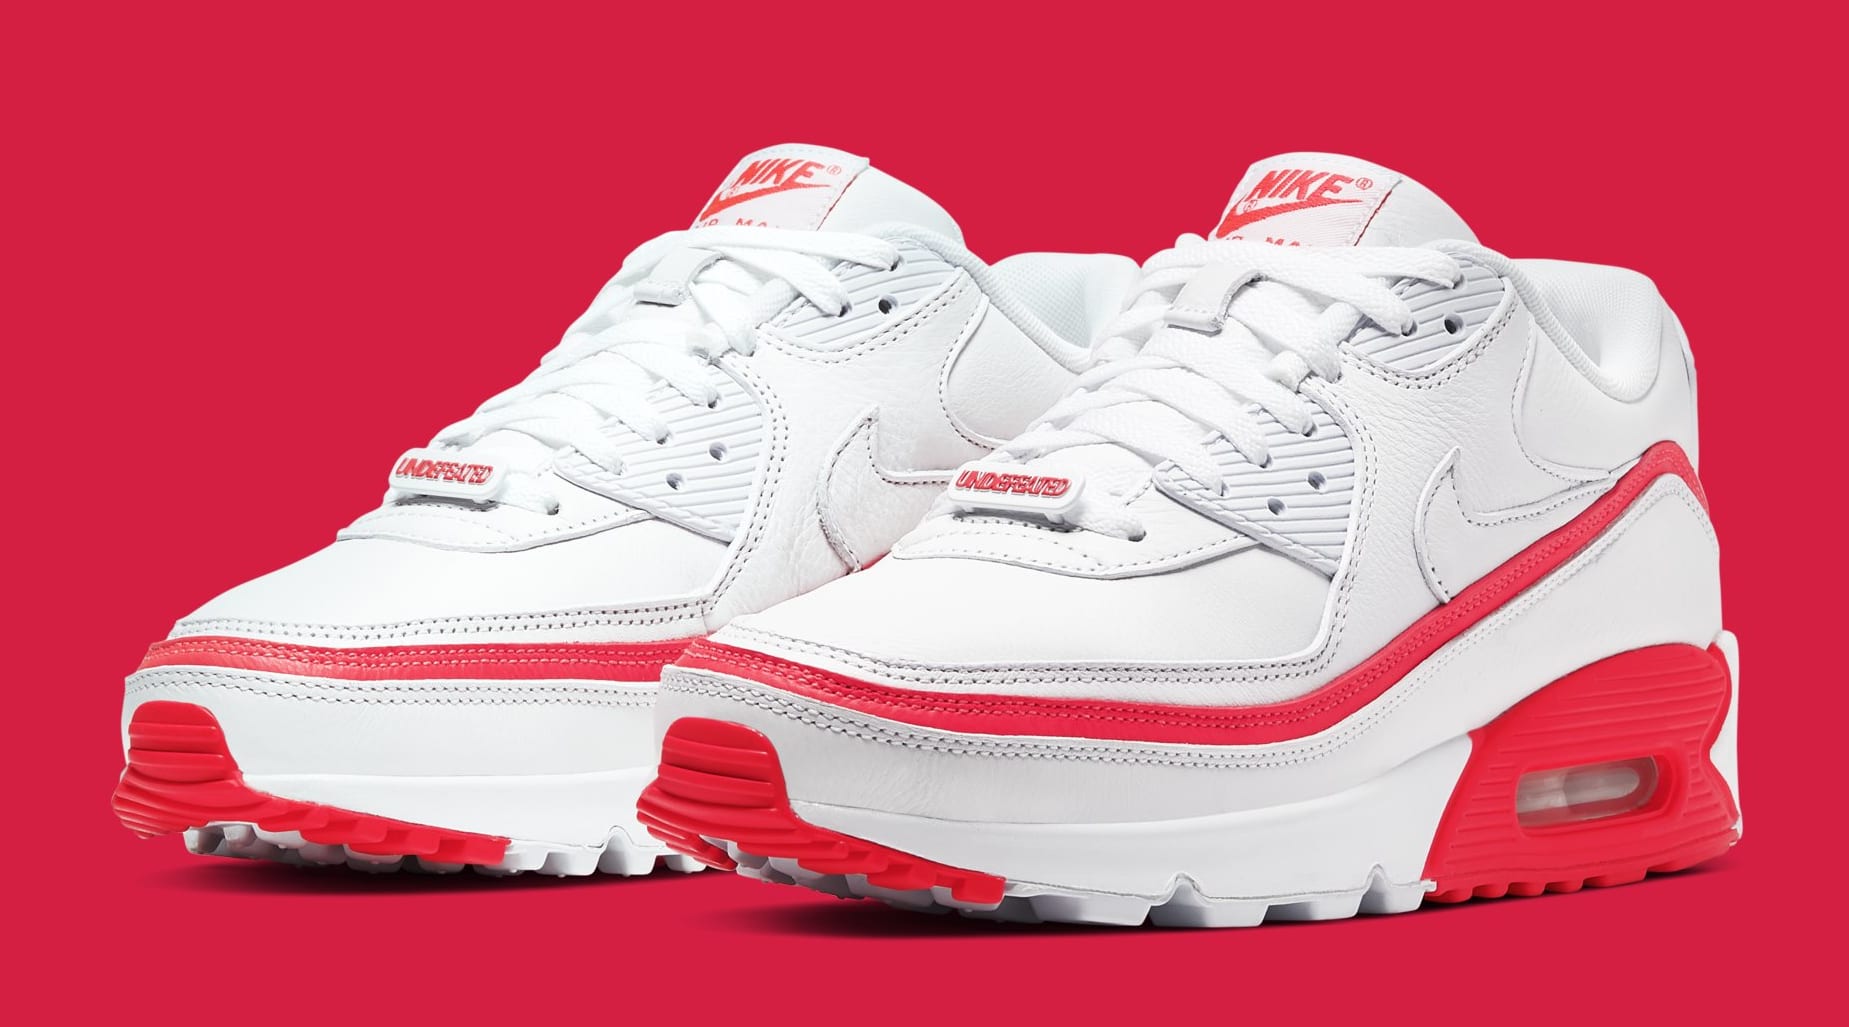 Nike Air Max 90 Undefeated white red 29 www.krzysztofbialy.com